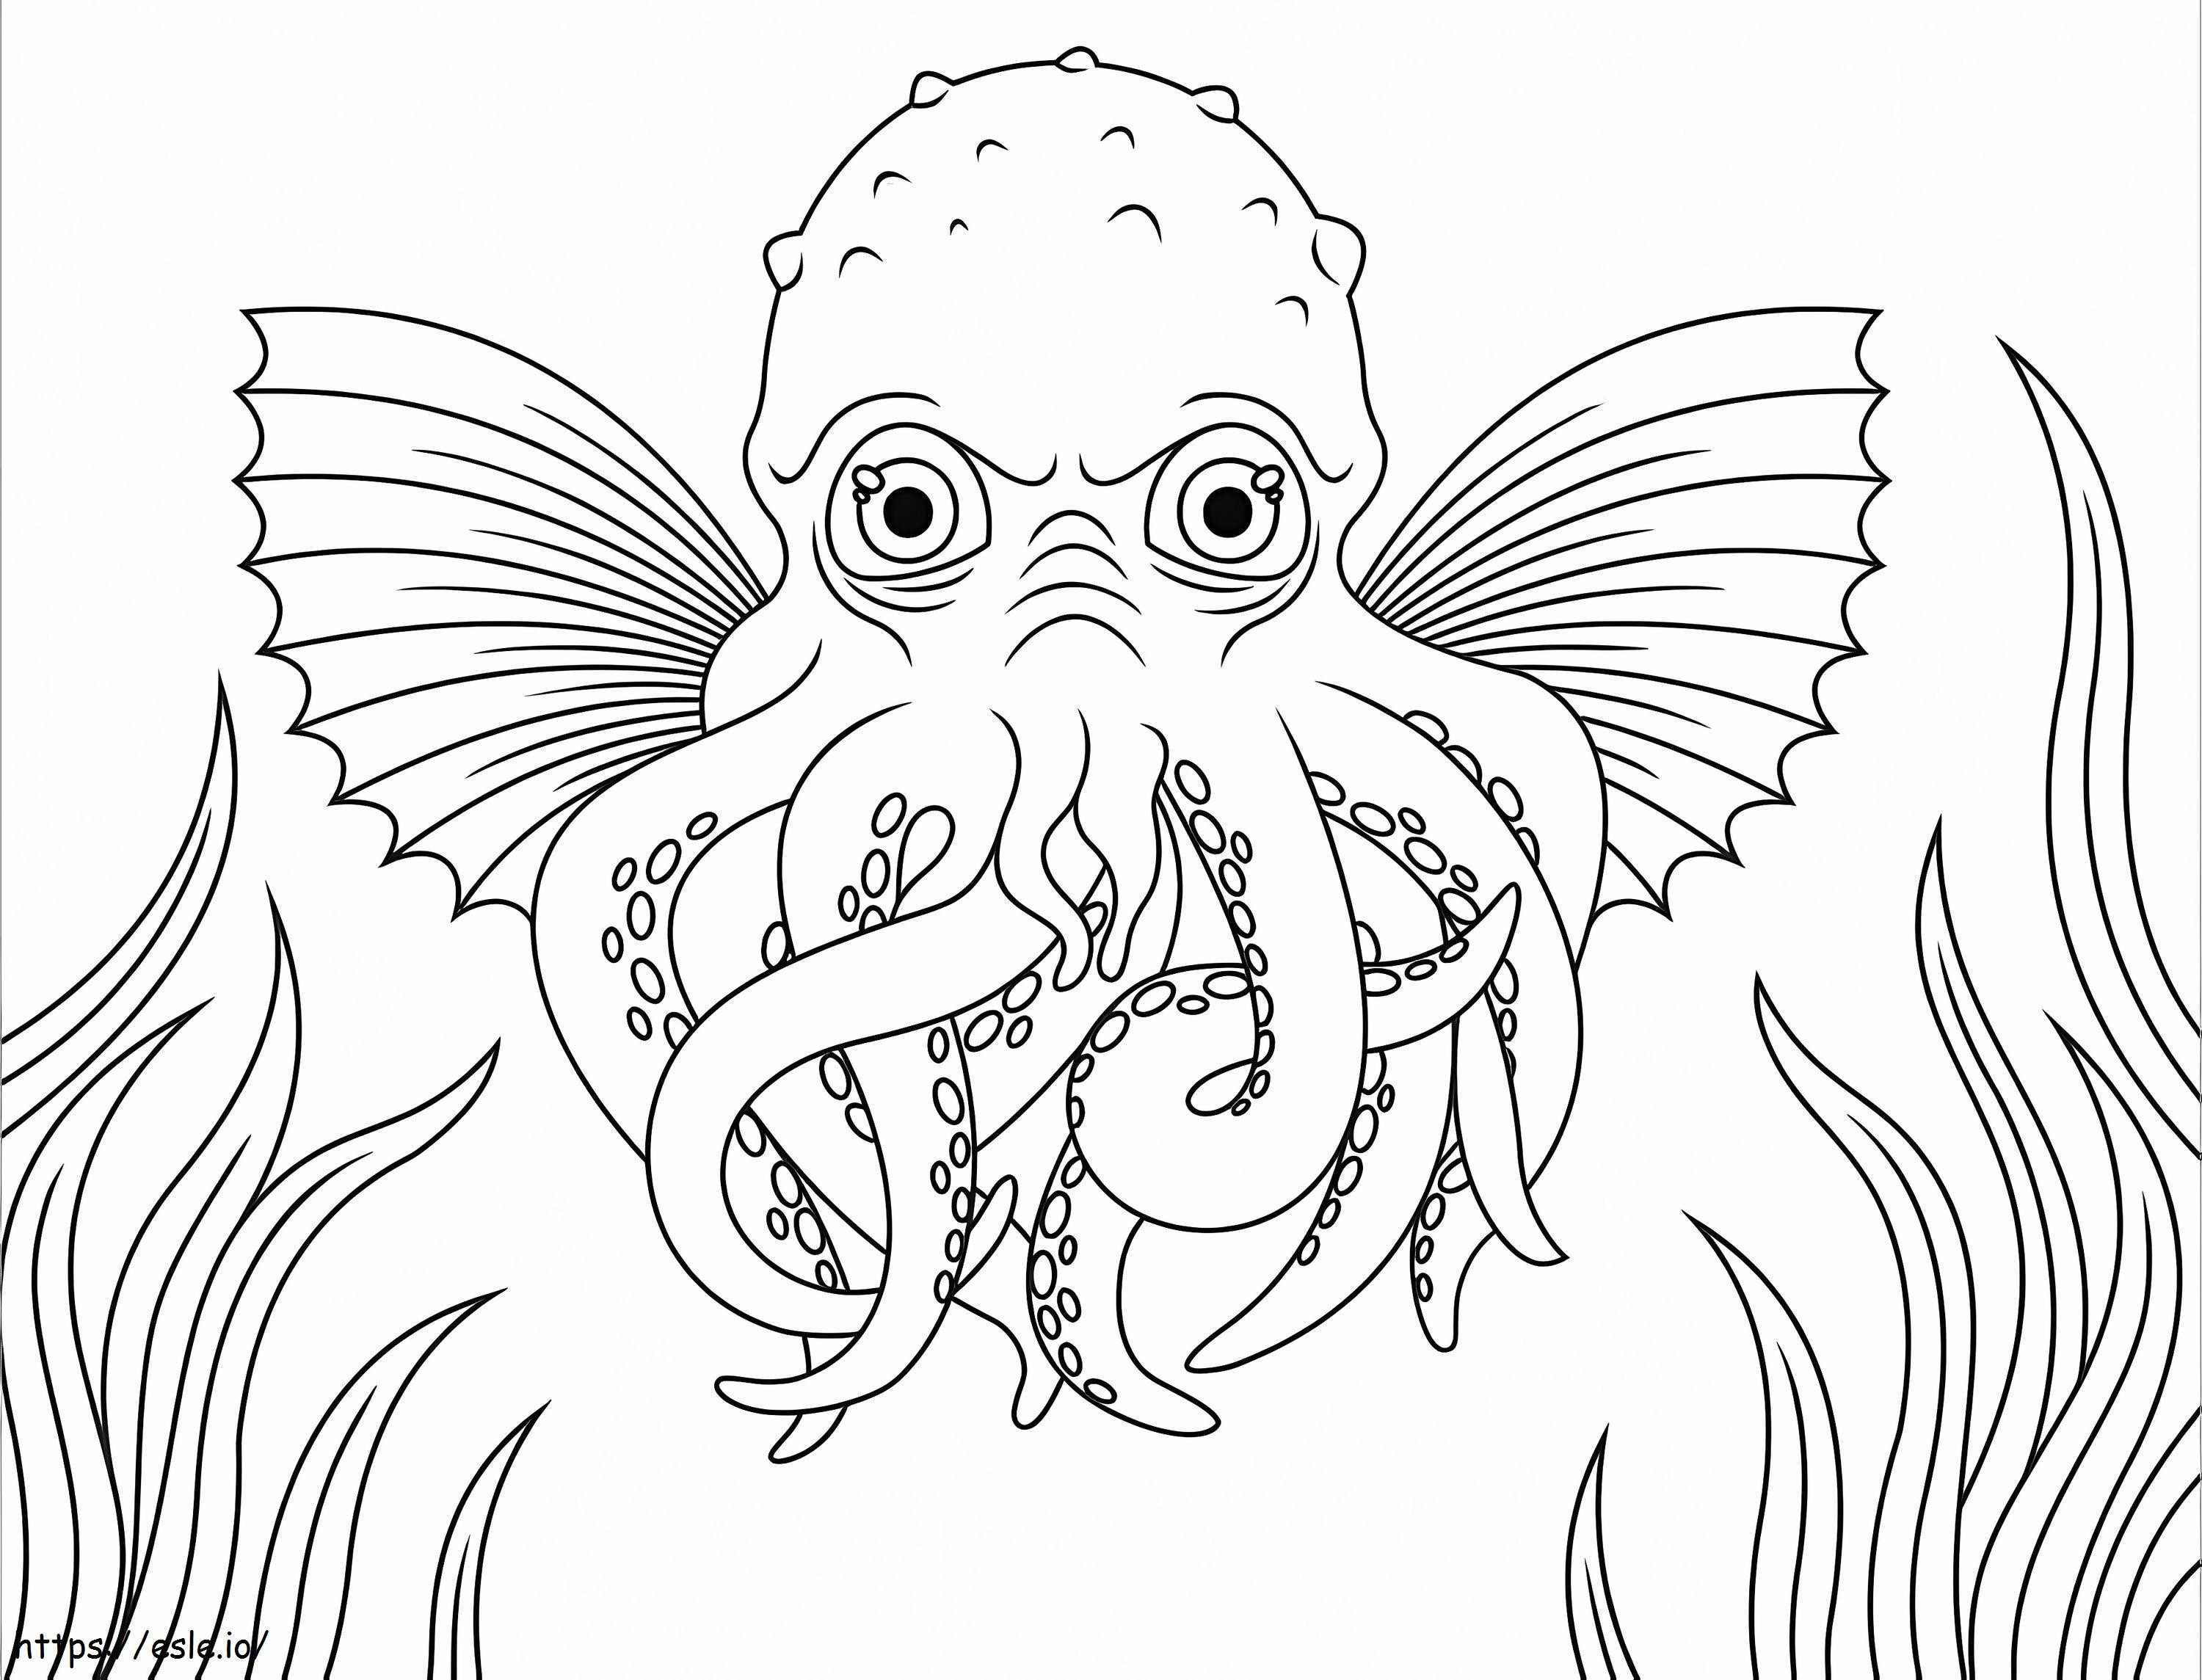 Printable Cthulhu coloring page